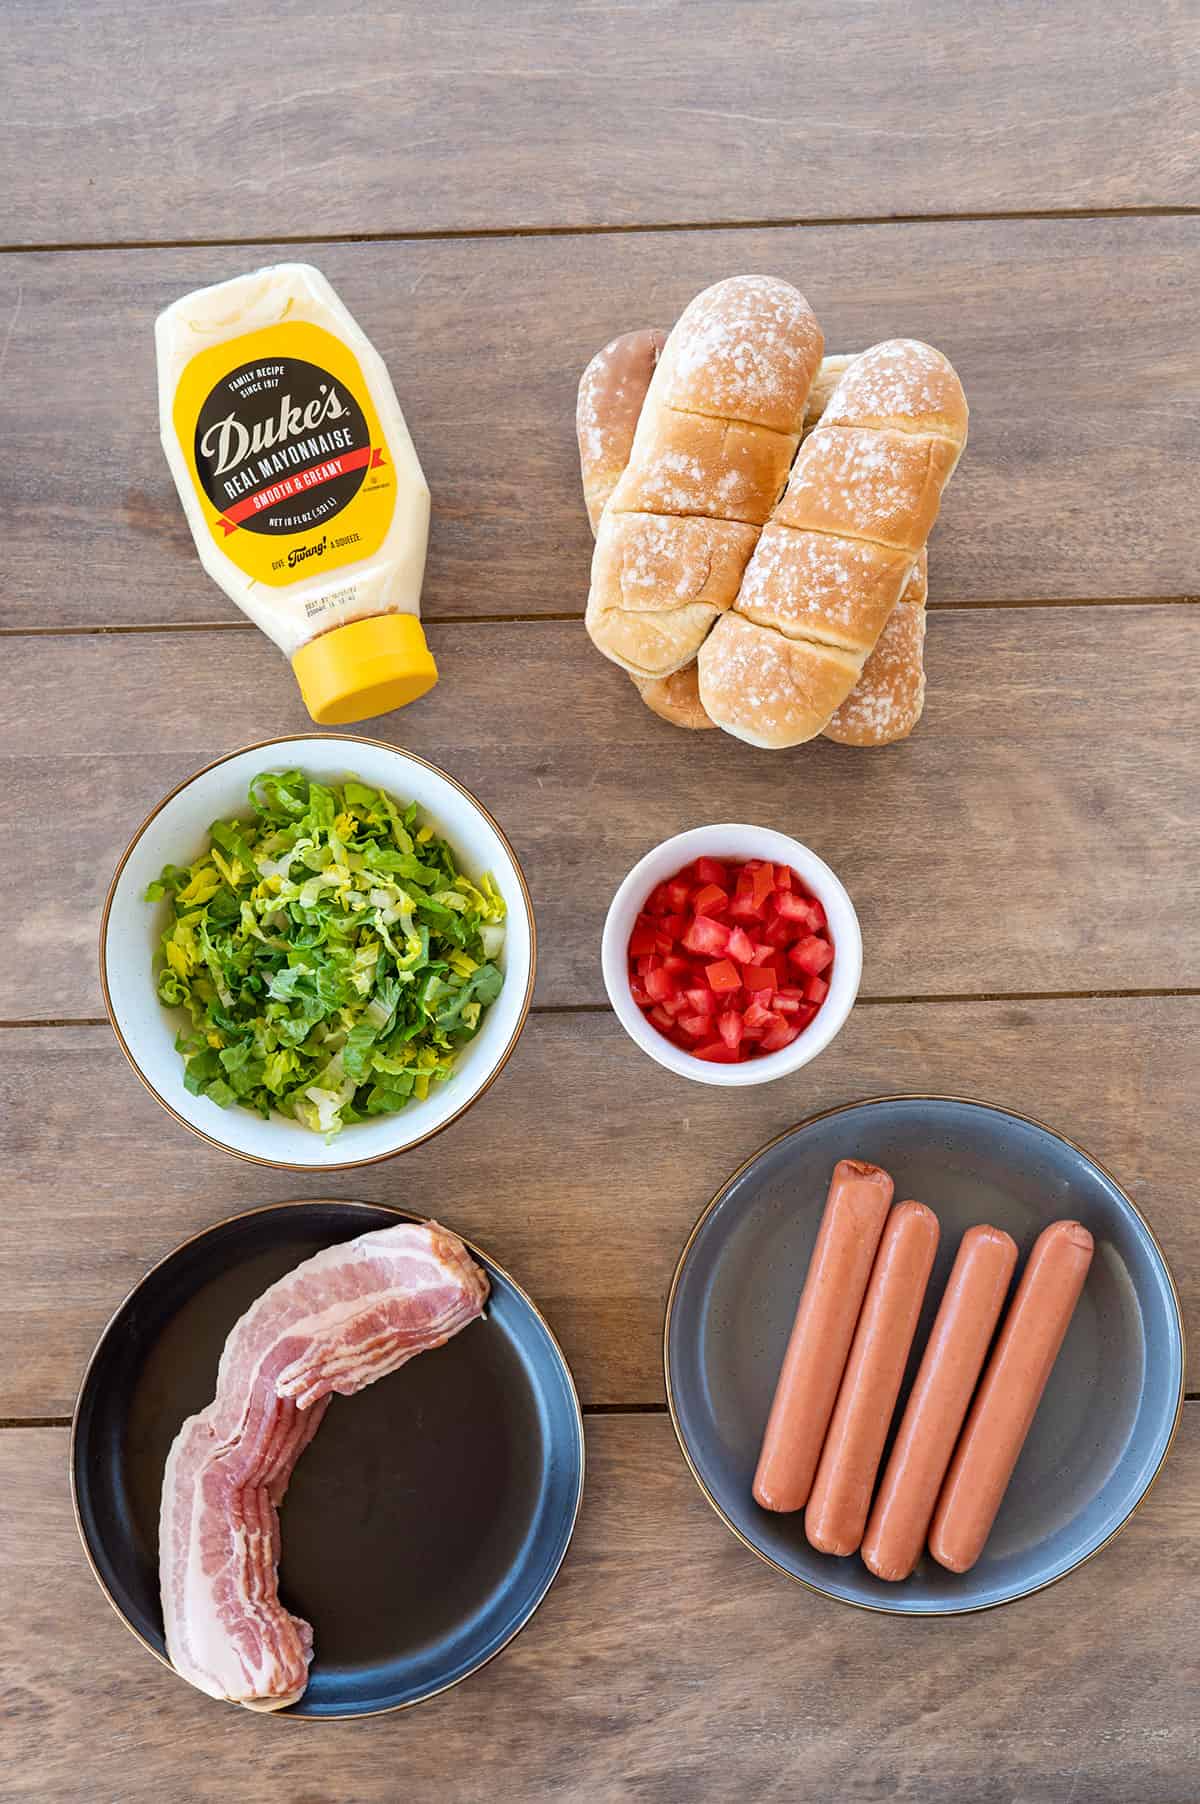 ingredients for BLT hot dogs: mayo, buns, lettuce, tomatoes, bacon, hot dogs.